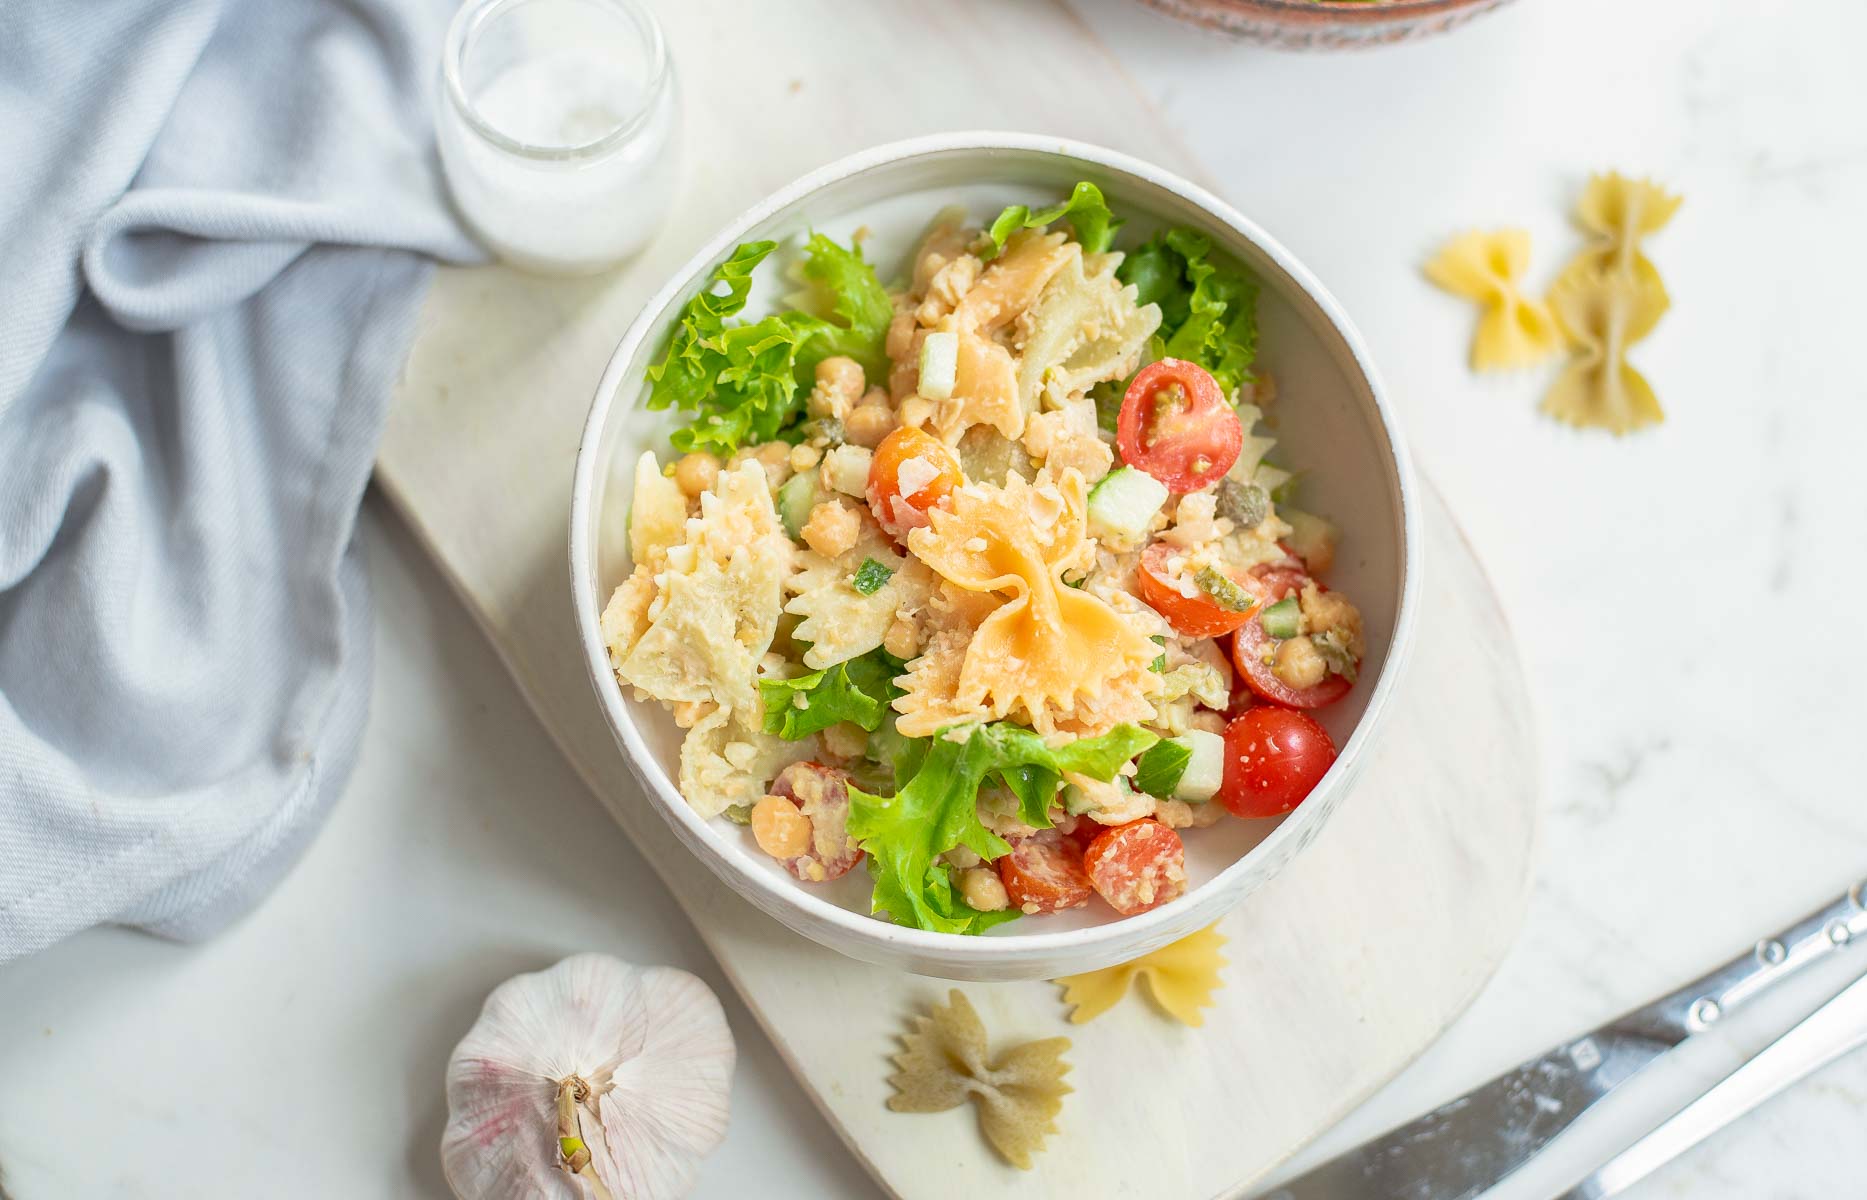 Serving of pasta salad with vegetables and beans in white bowl.